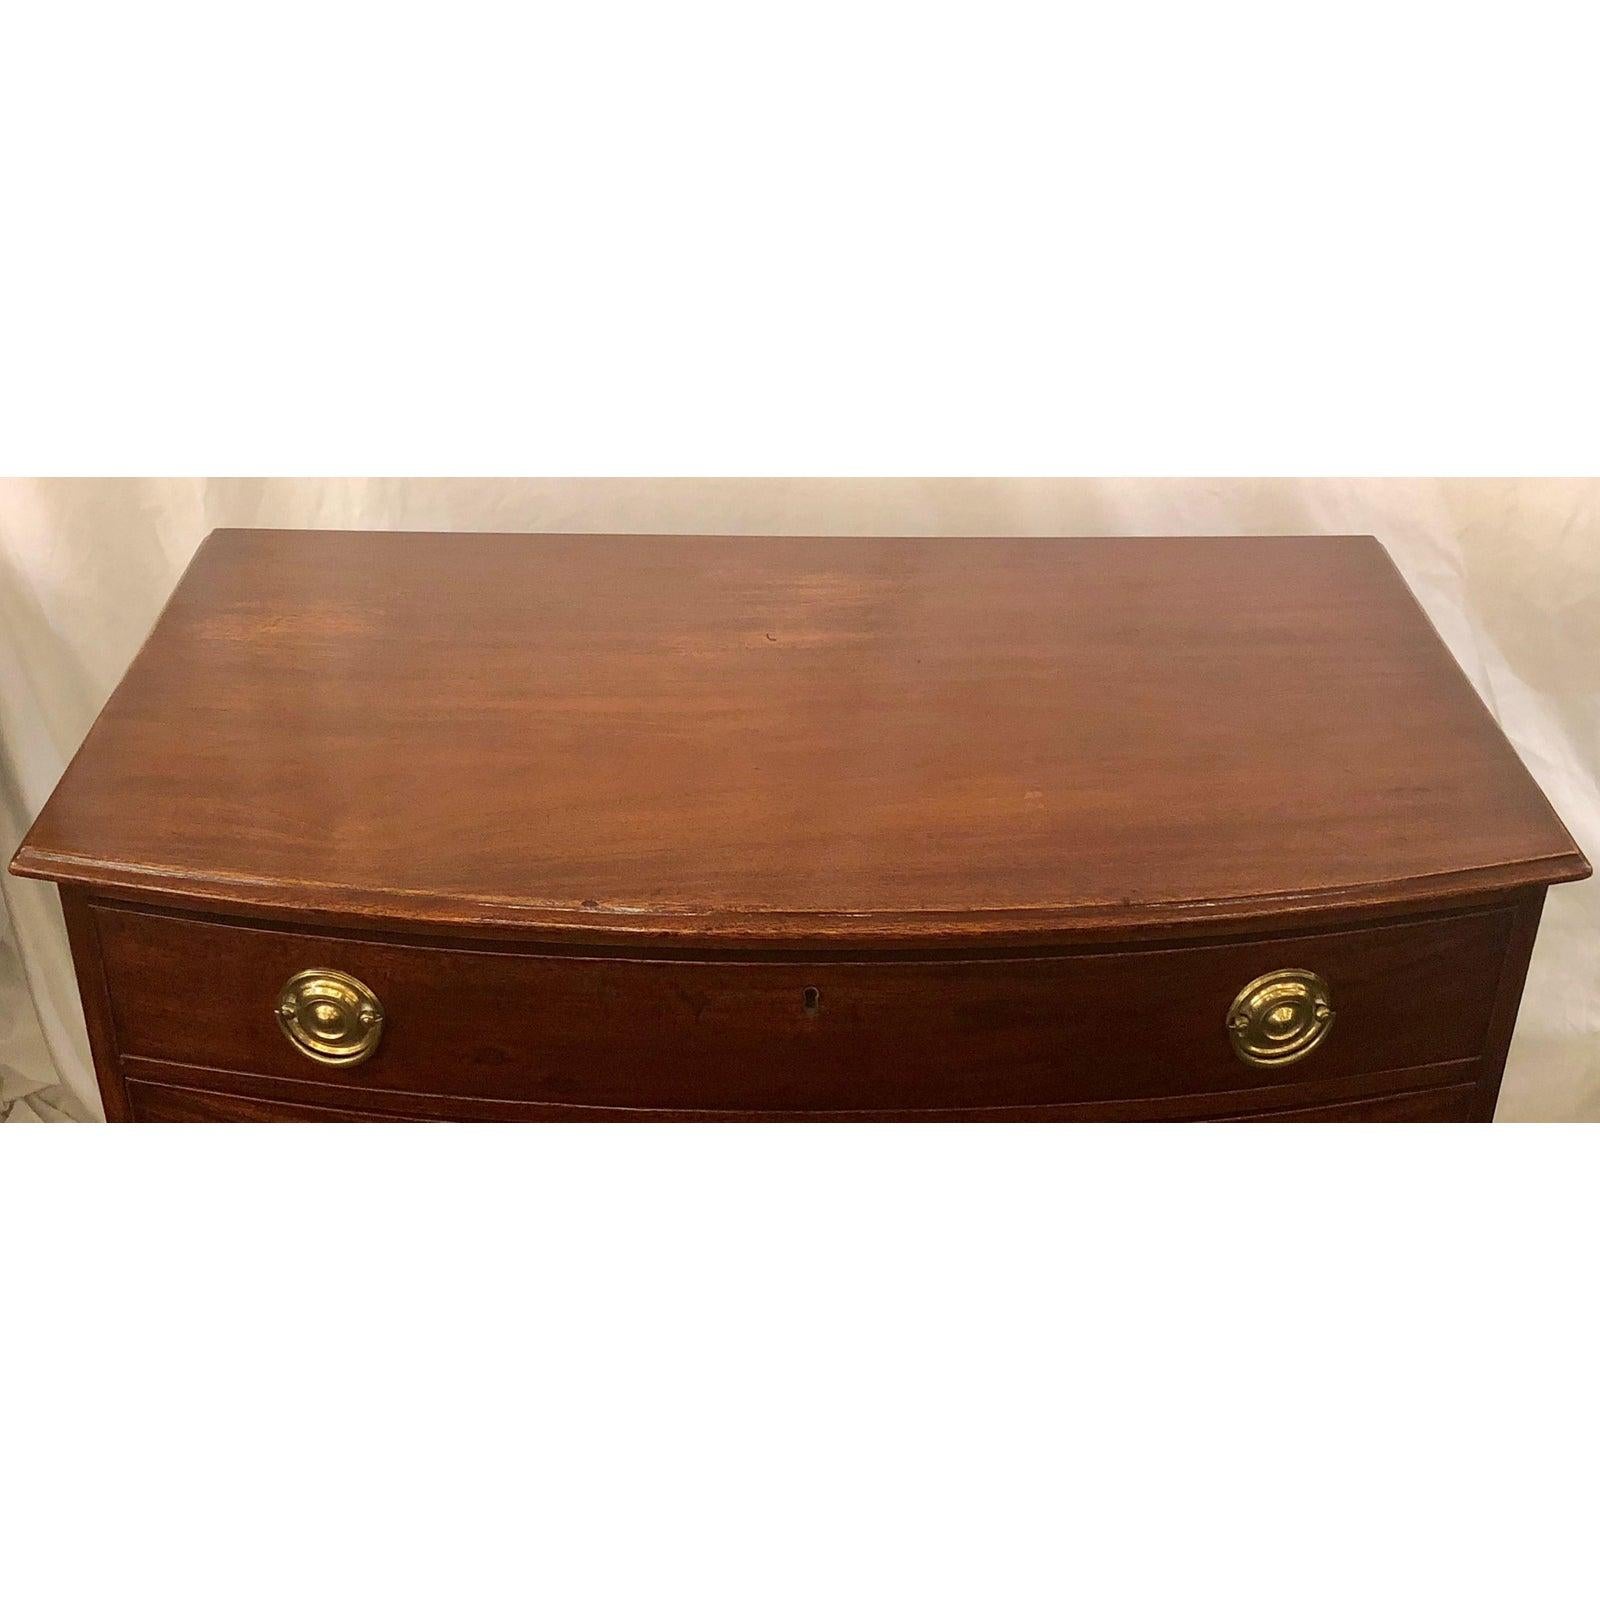 Antique American 18th century mahogany bow-front chest of drawers, circa 1780.